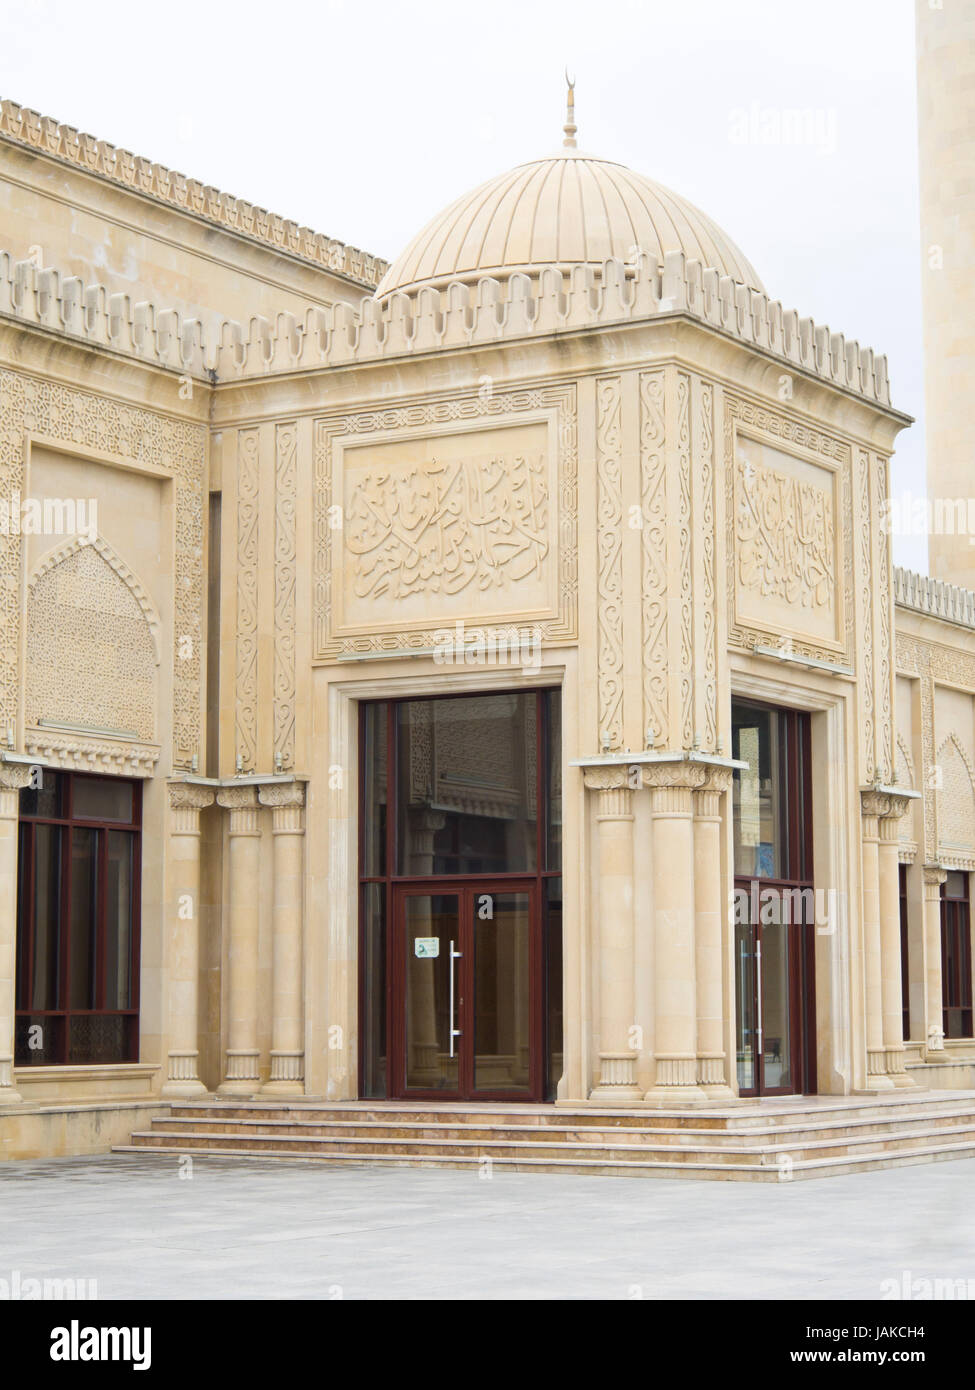 Juma Mosque in the town of  Shamakhi origins dating back to ca 744, reconstructed many times, latest in ca 2010, main entrance with ornamental carving Stock Photo